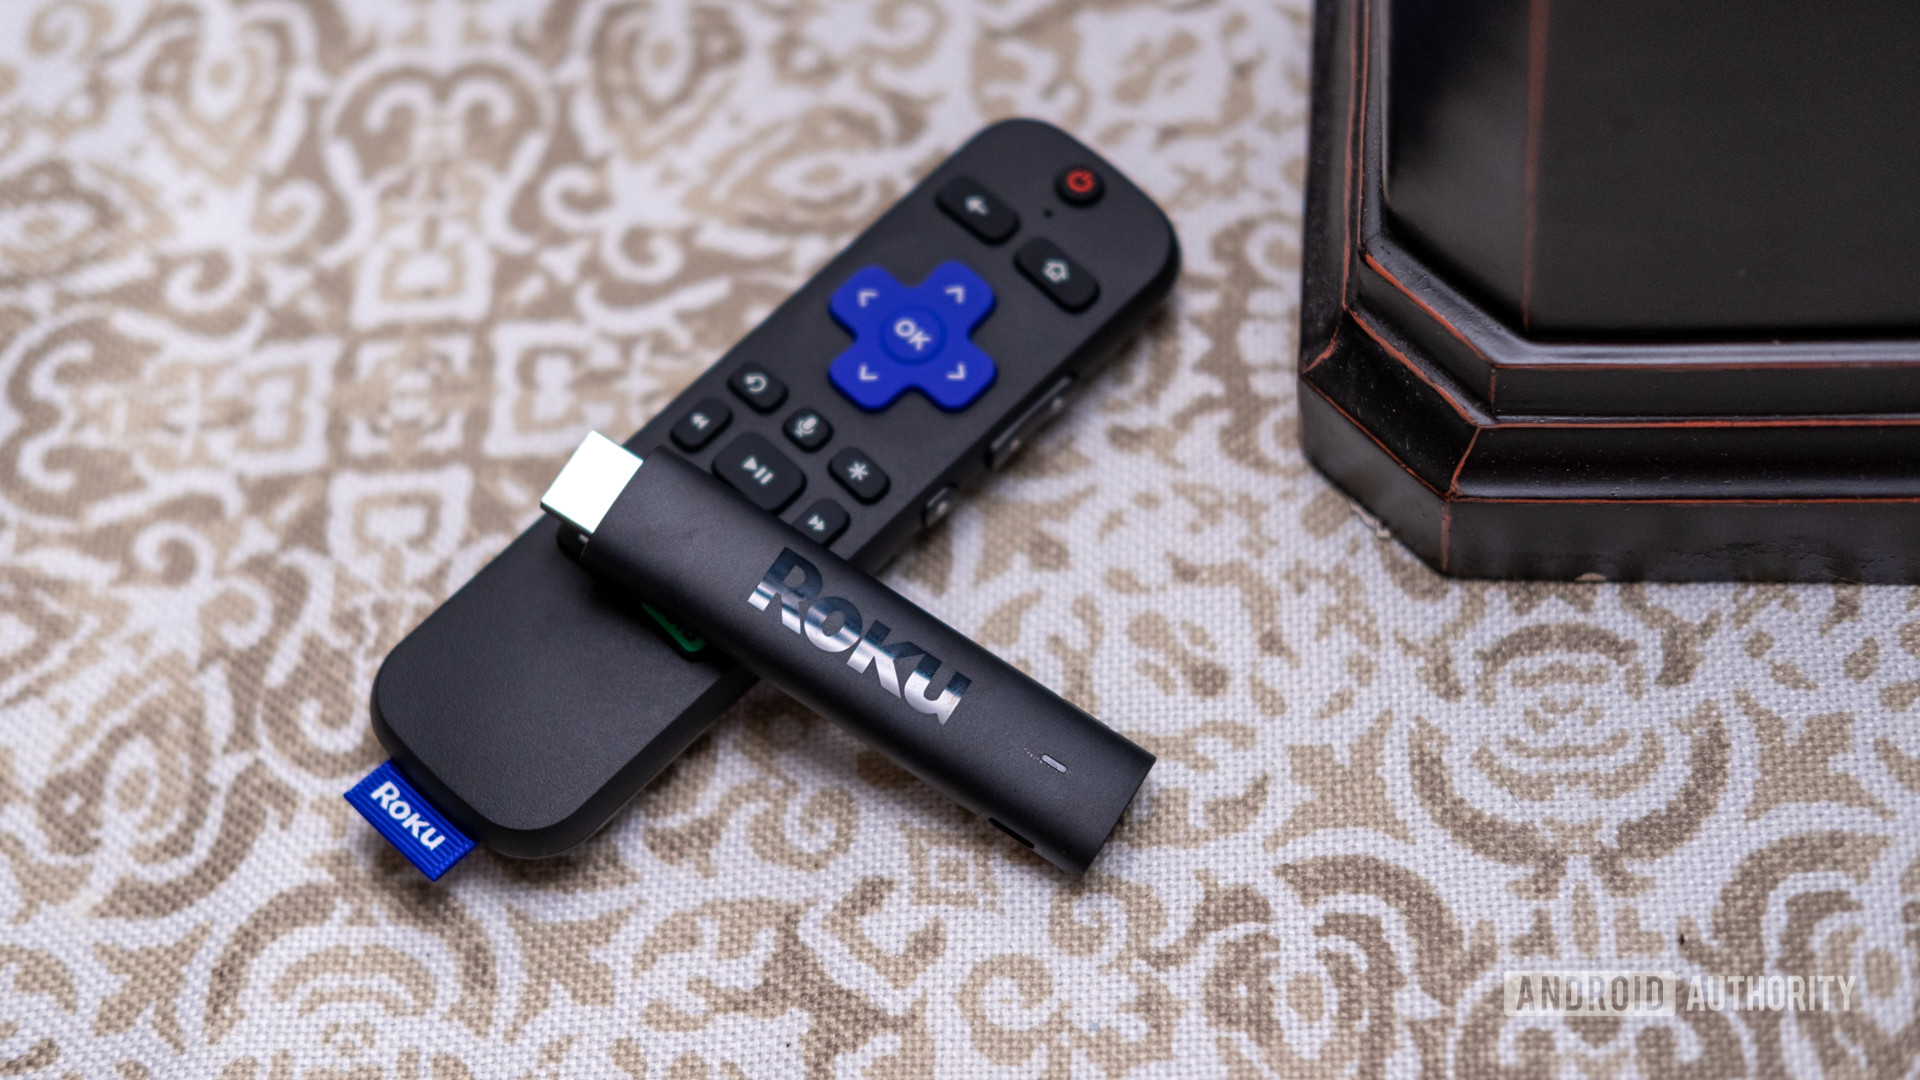 roku streaming stick 4k on remote Black Friday streaming device deals